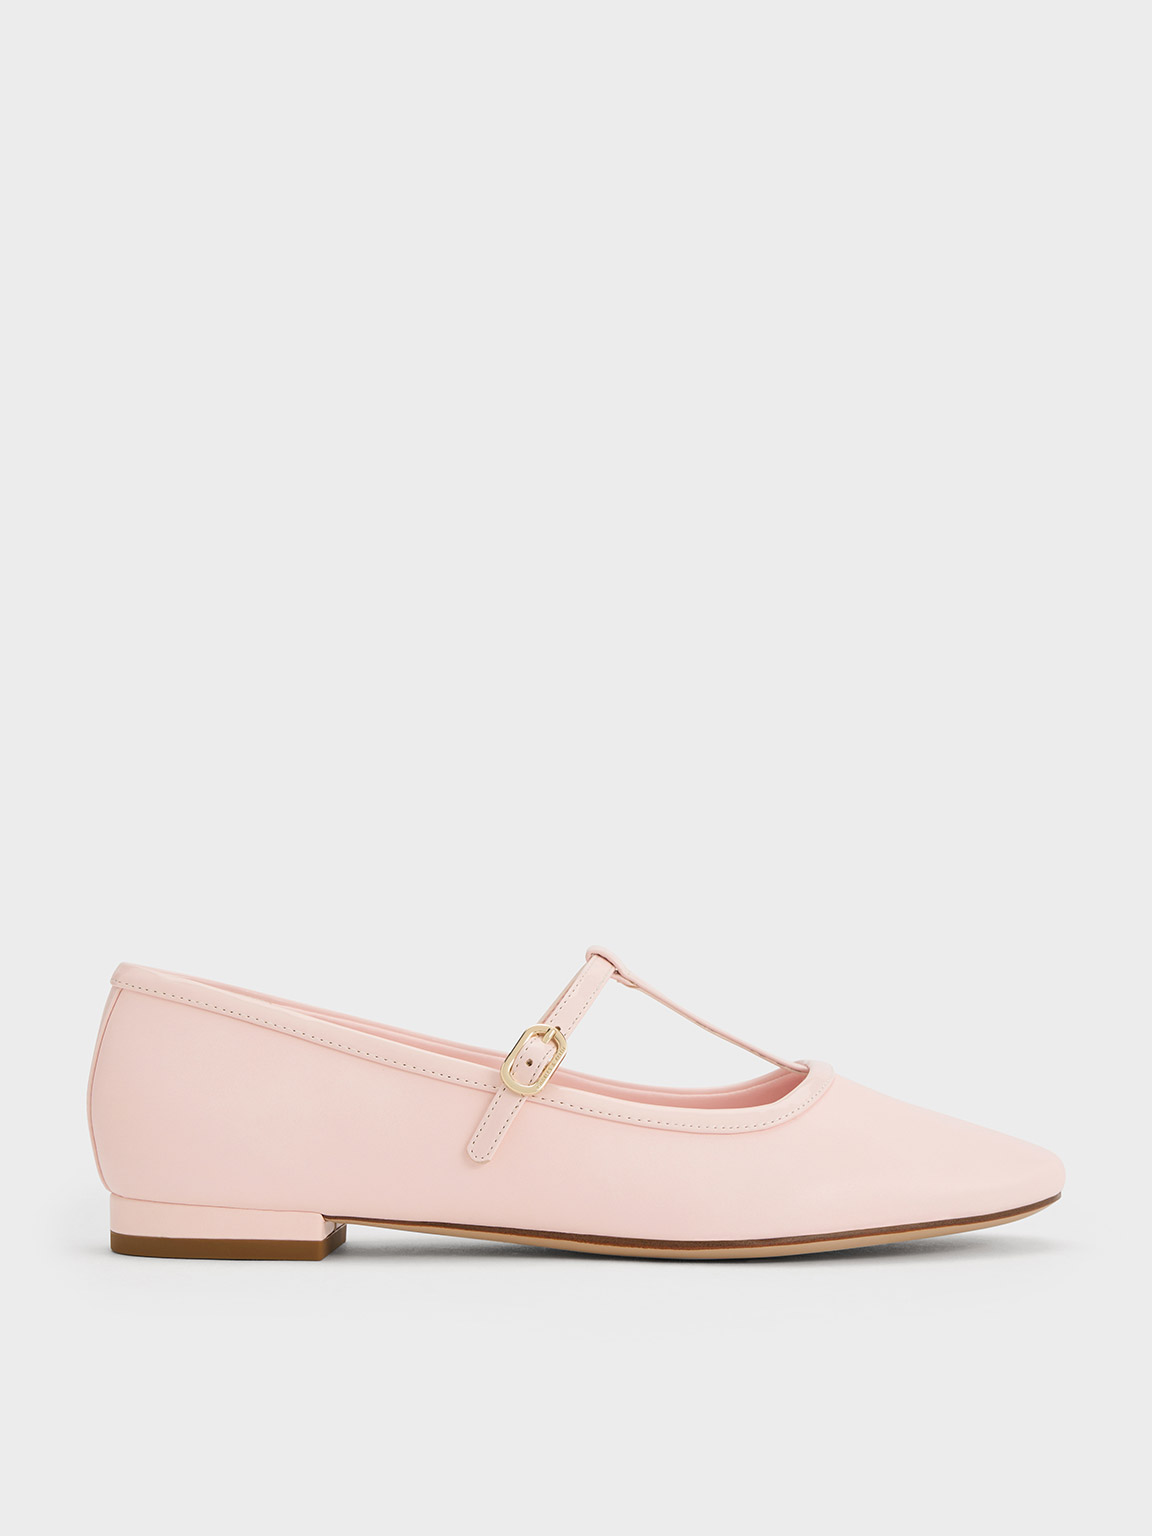 Charles & Keith T-bar Mary Jane Flats In Light Pink